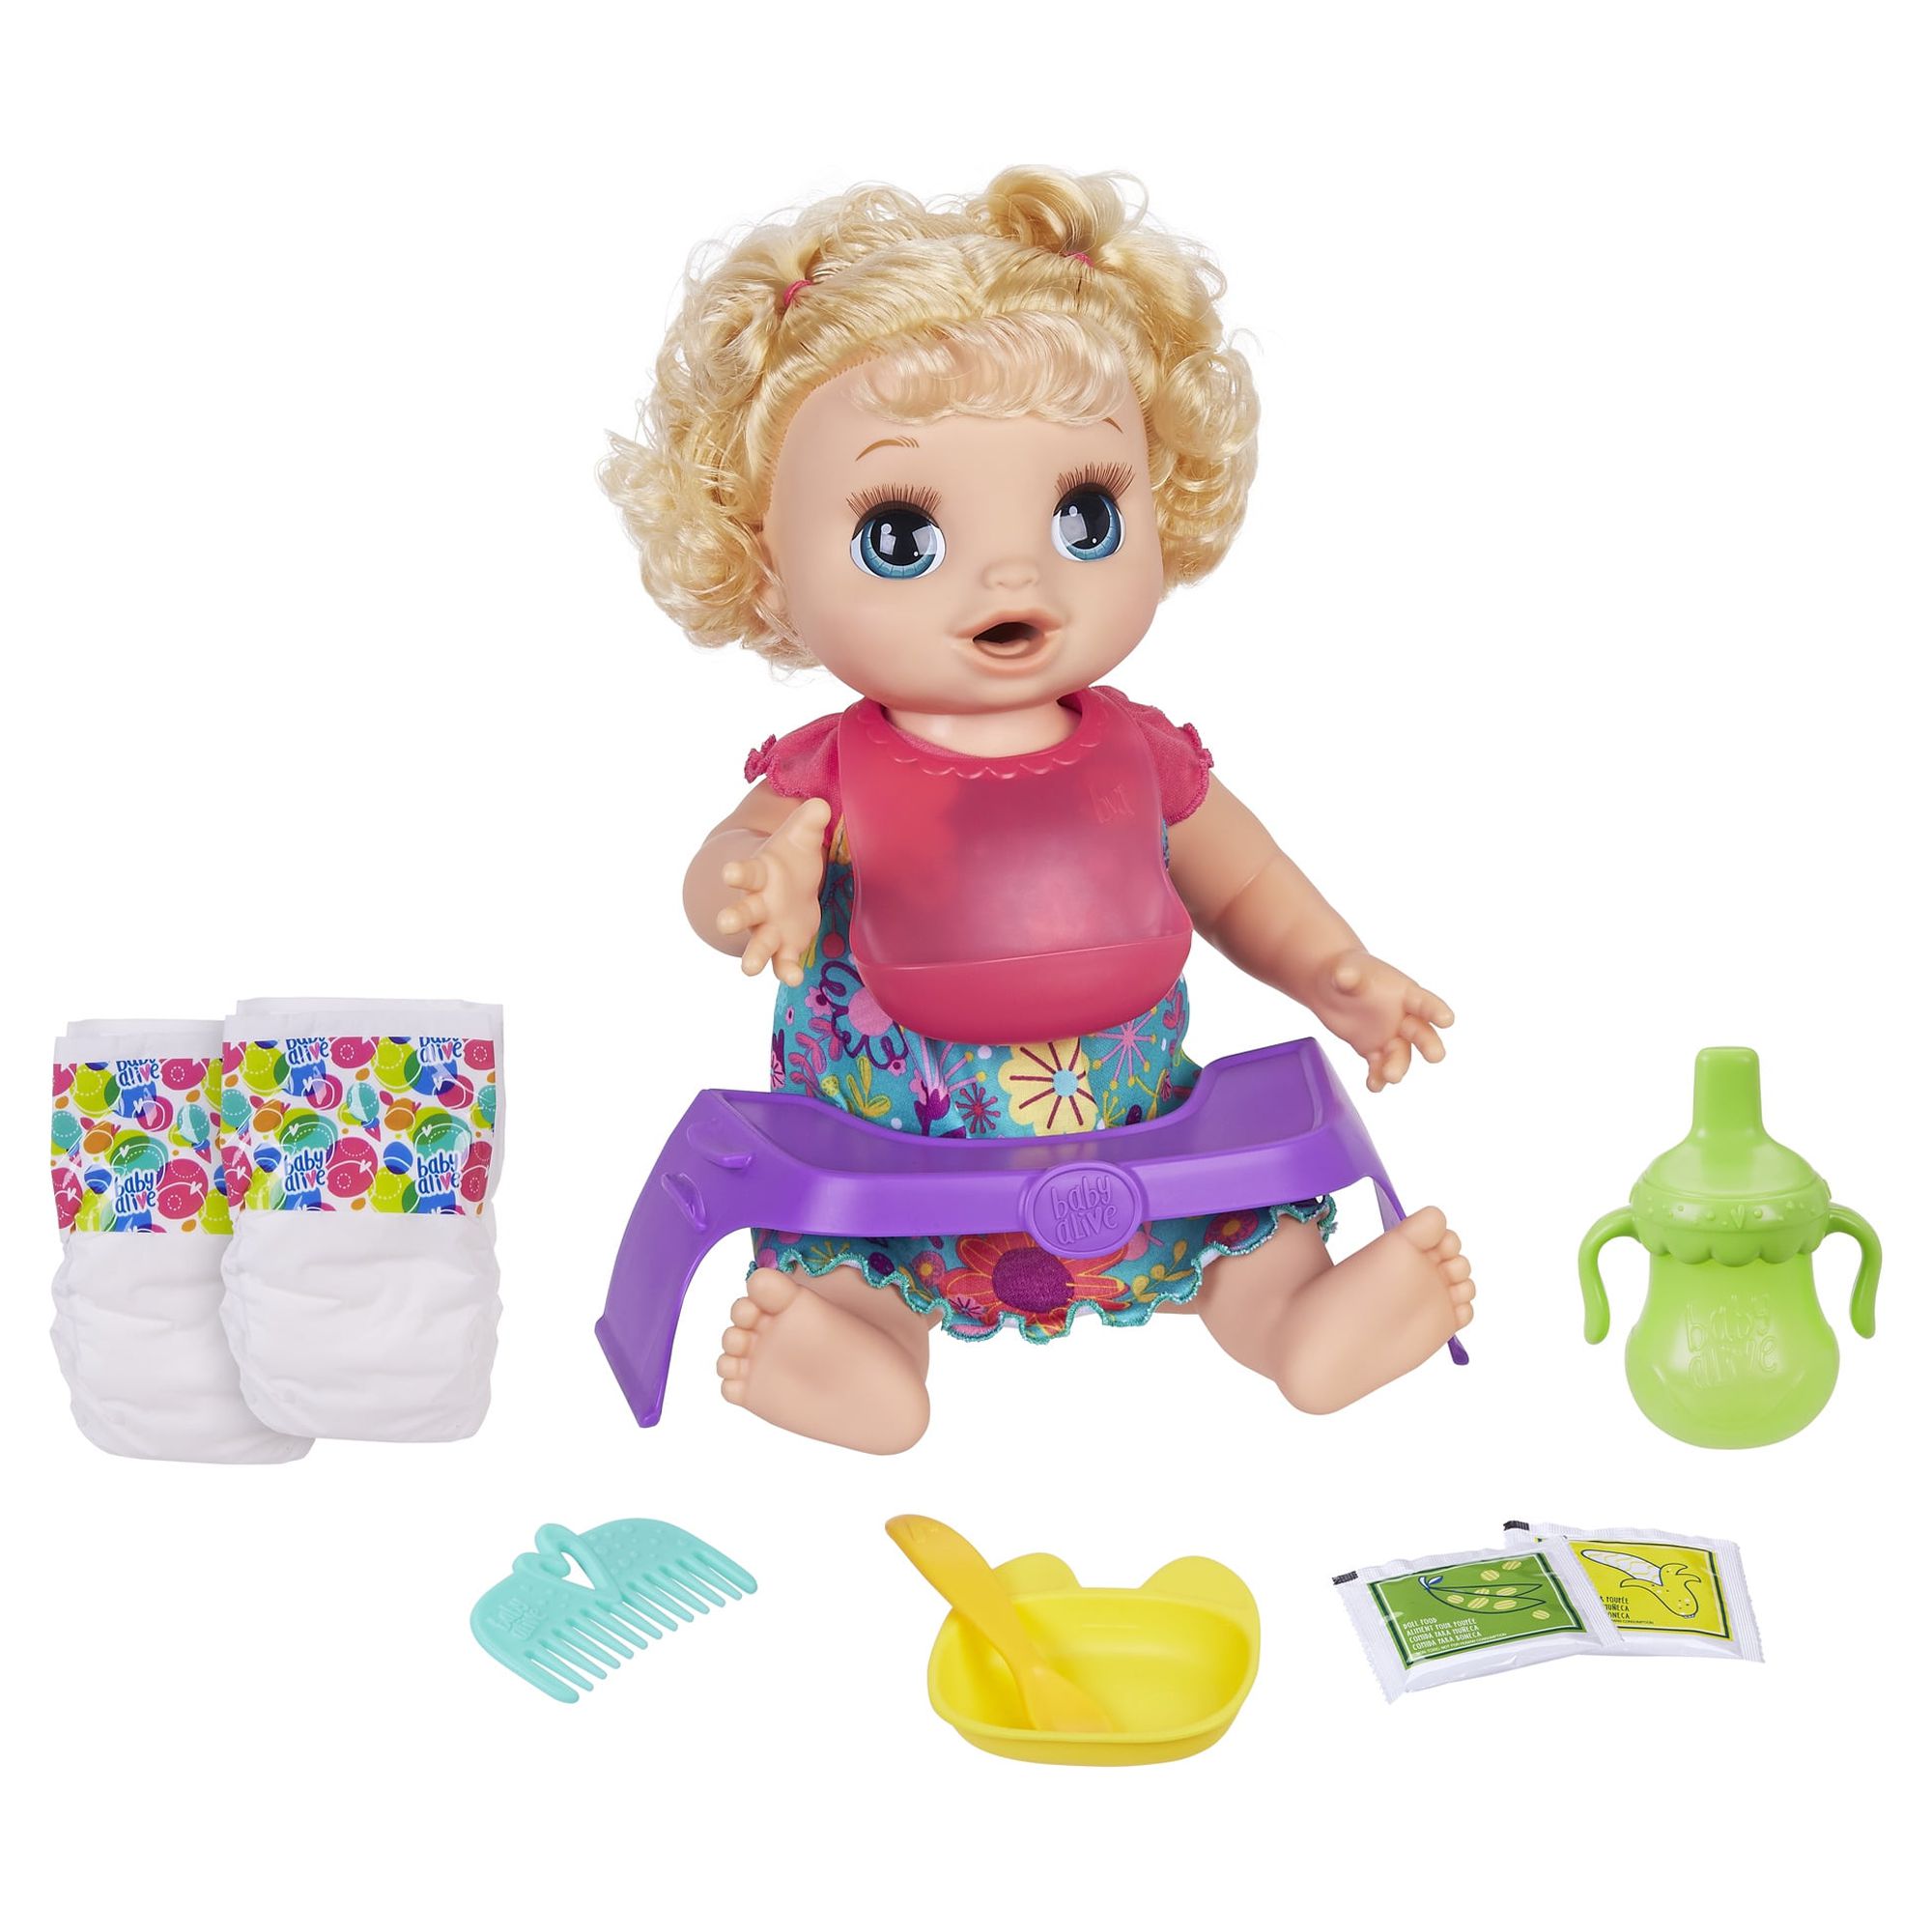 Baby Alive: Happy Hungry Baby 16-Inch Doll Blonde Hair, Blue Eyes Kids Toy for Boys and Girls - image 1 of 16